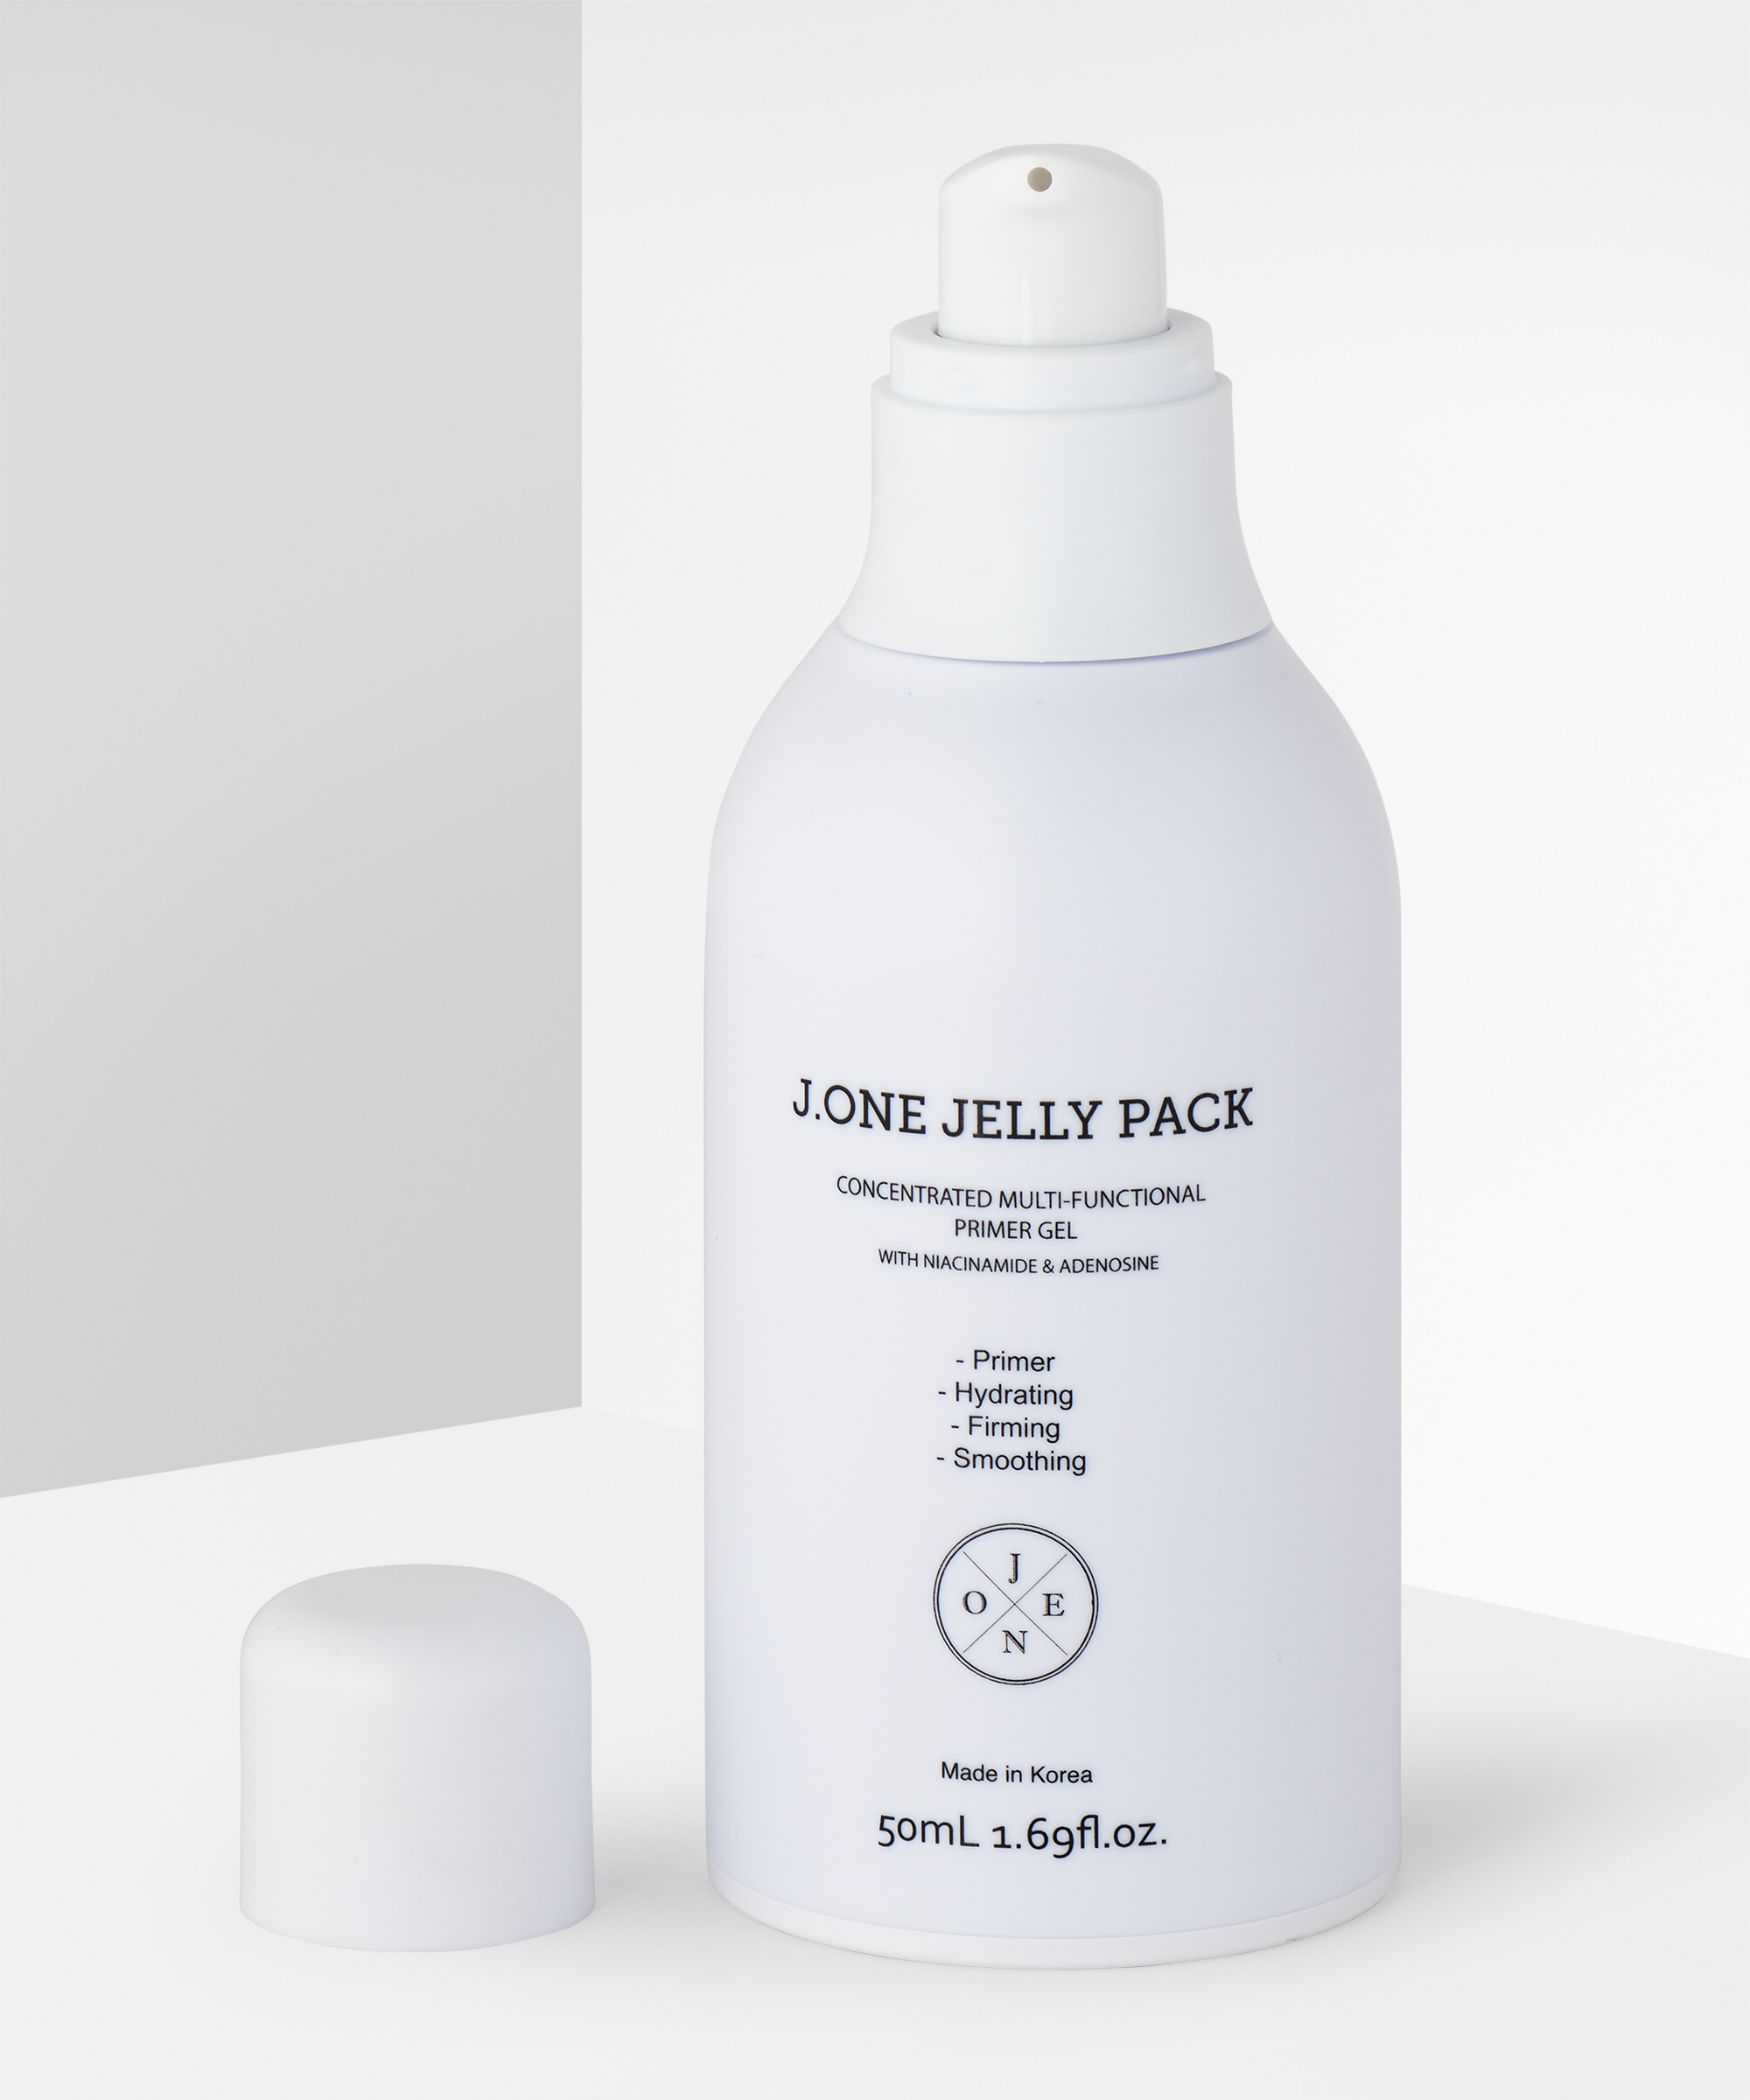 J One Jelly Pack Gel Primer At Beauty Bay